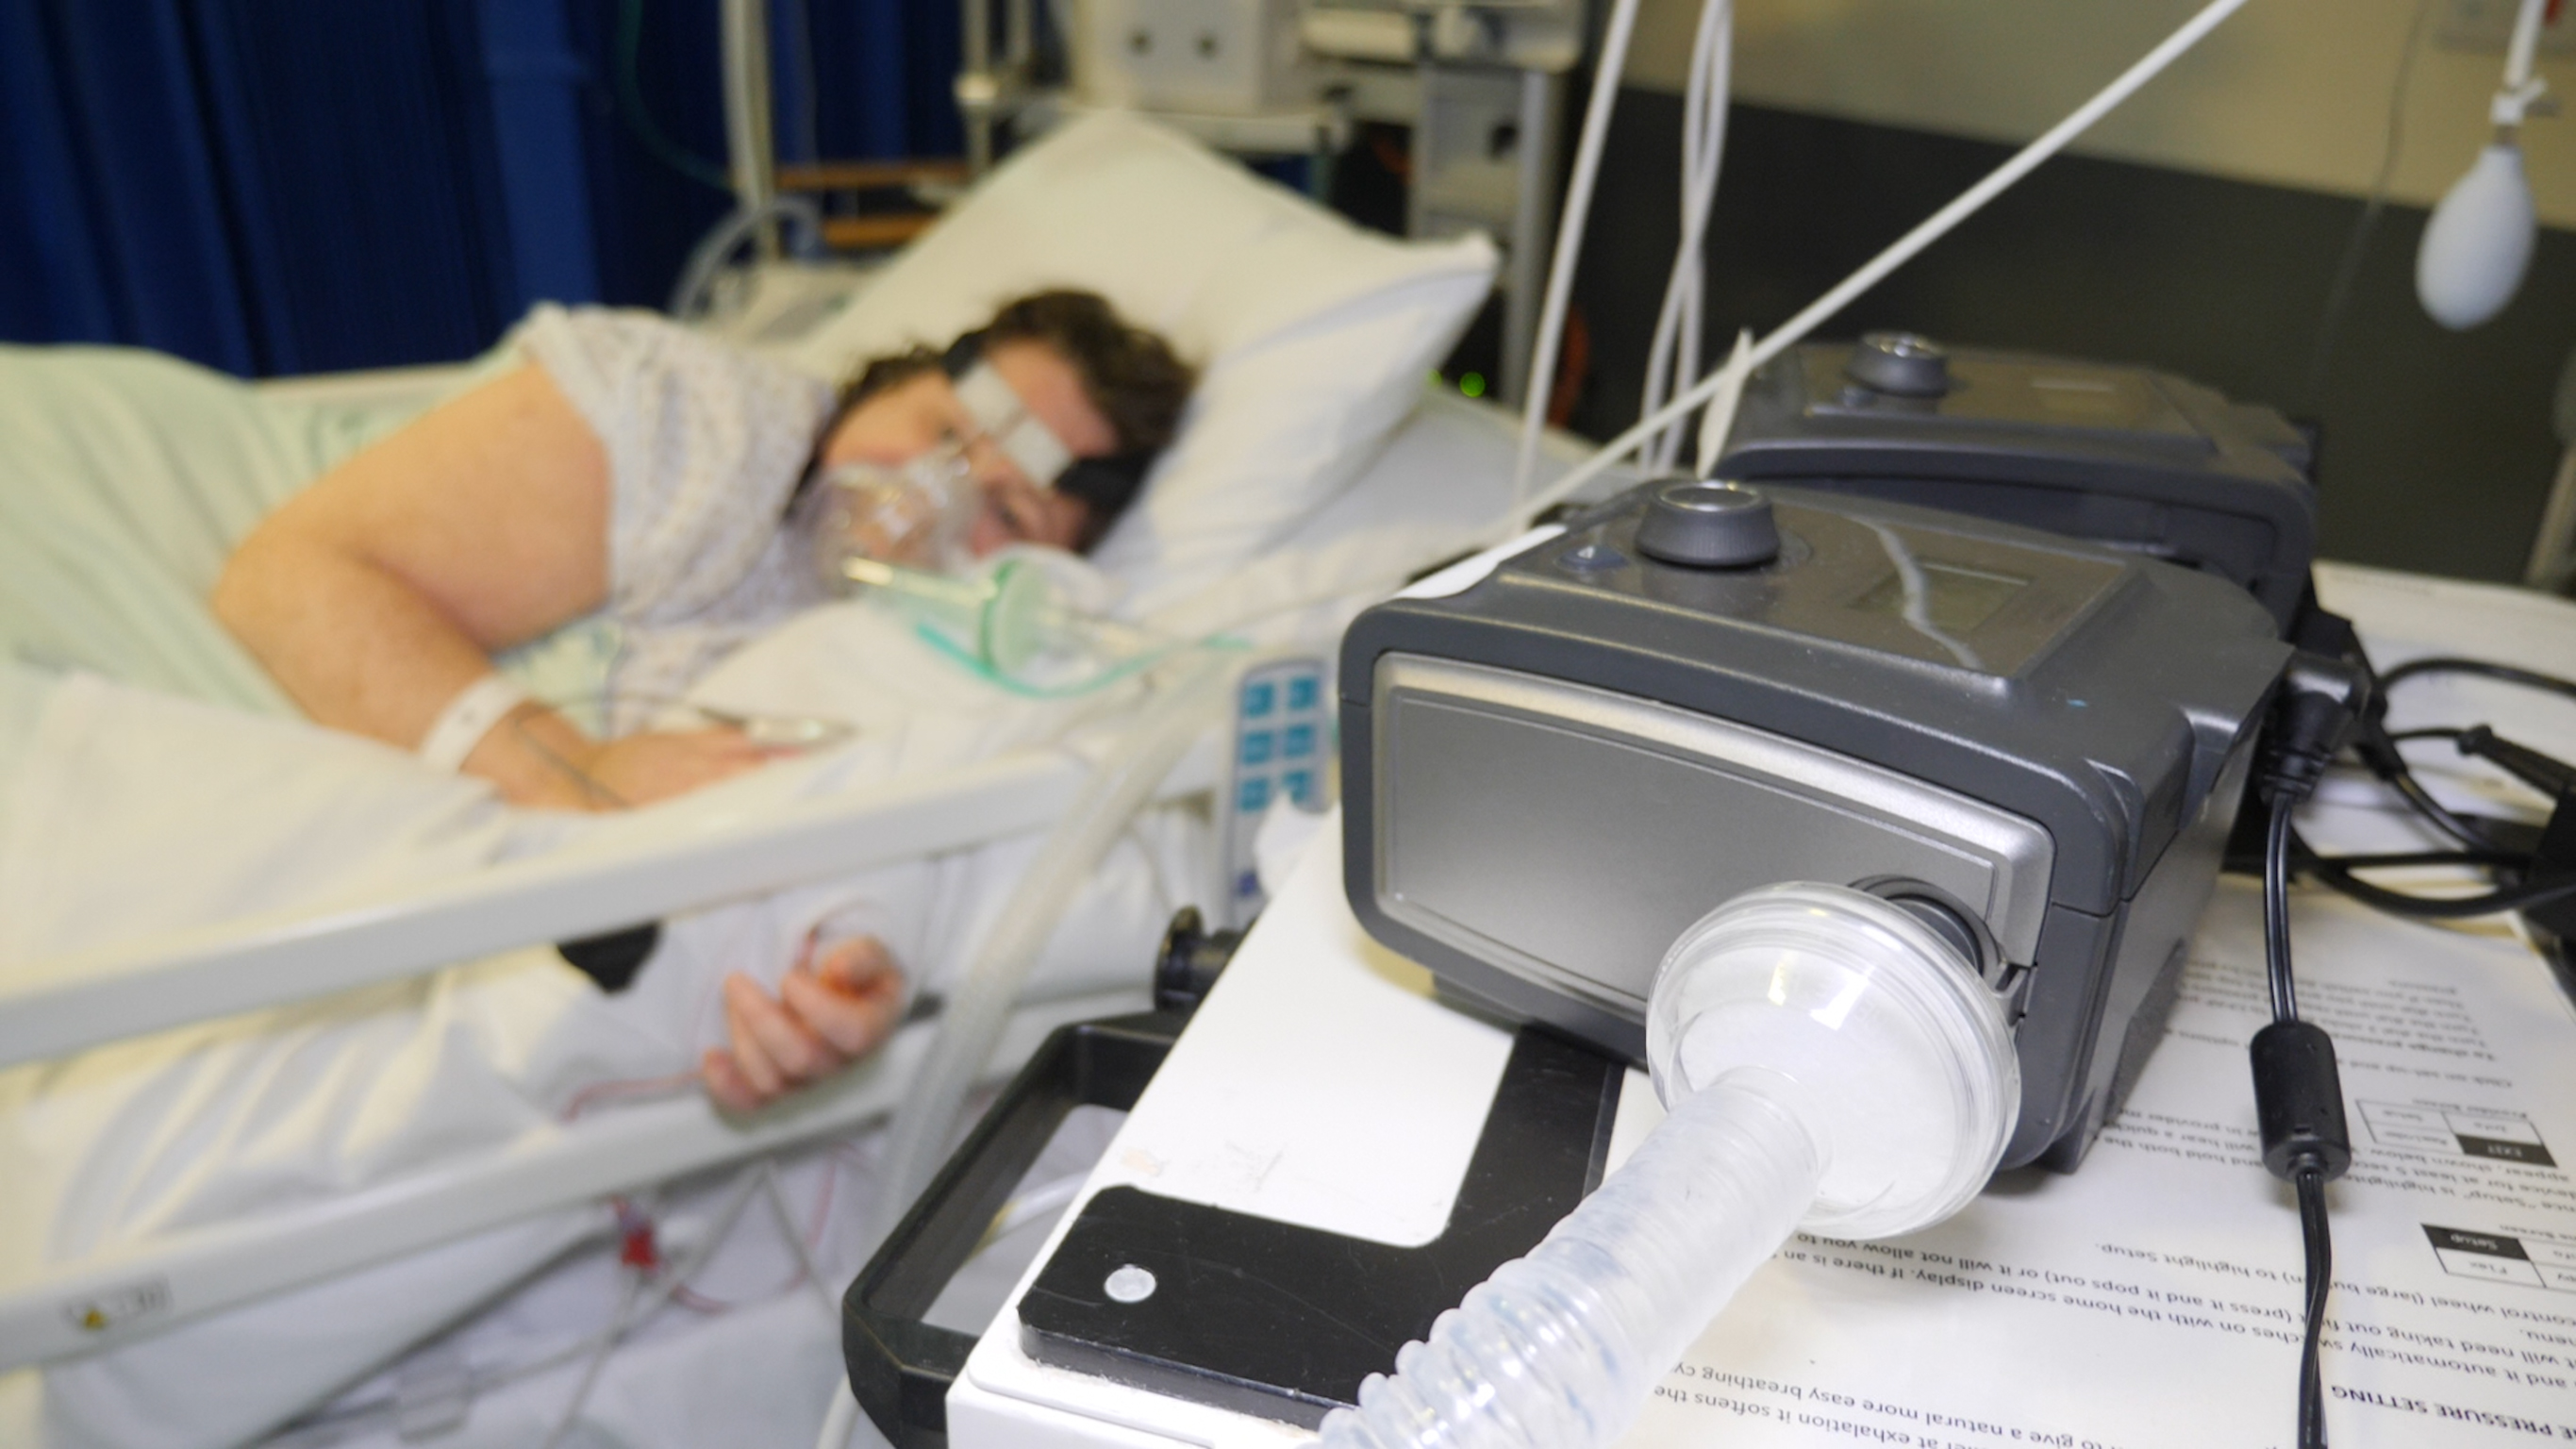 Patient Donna Wall with the CPAP machine pic courtesy of Sky News.jpg